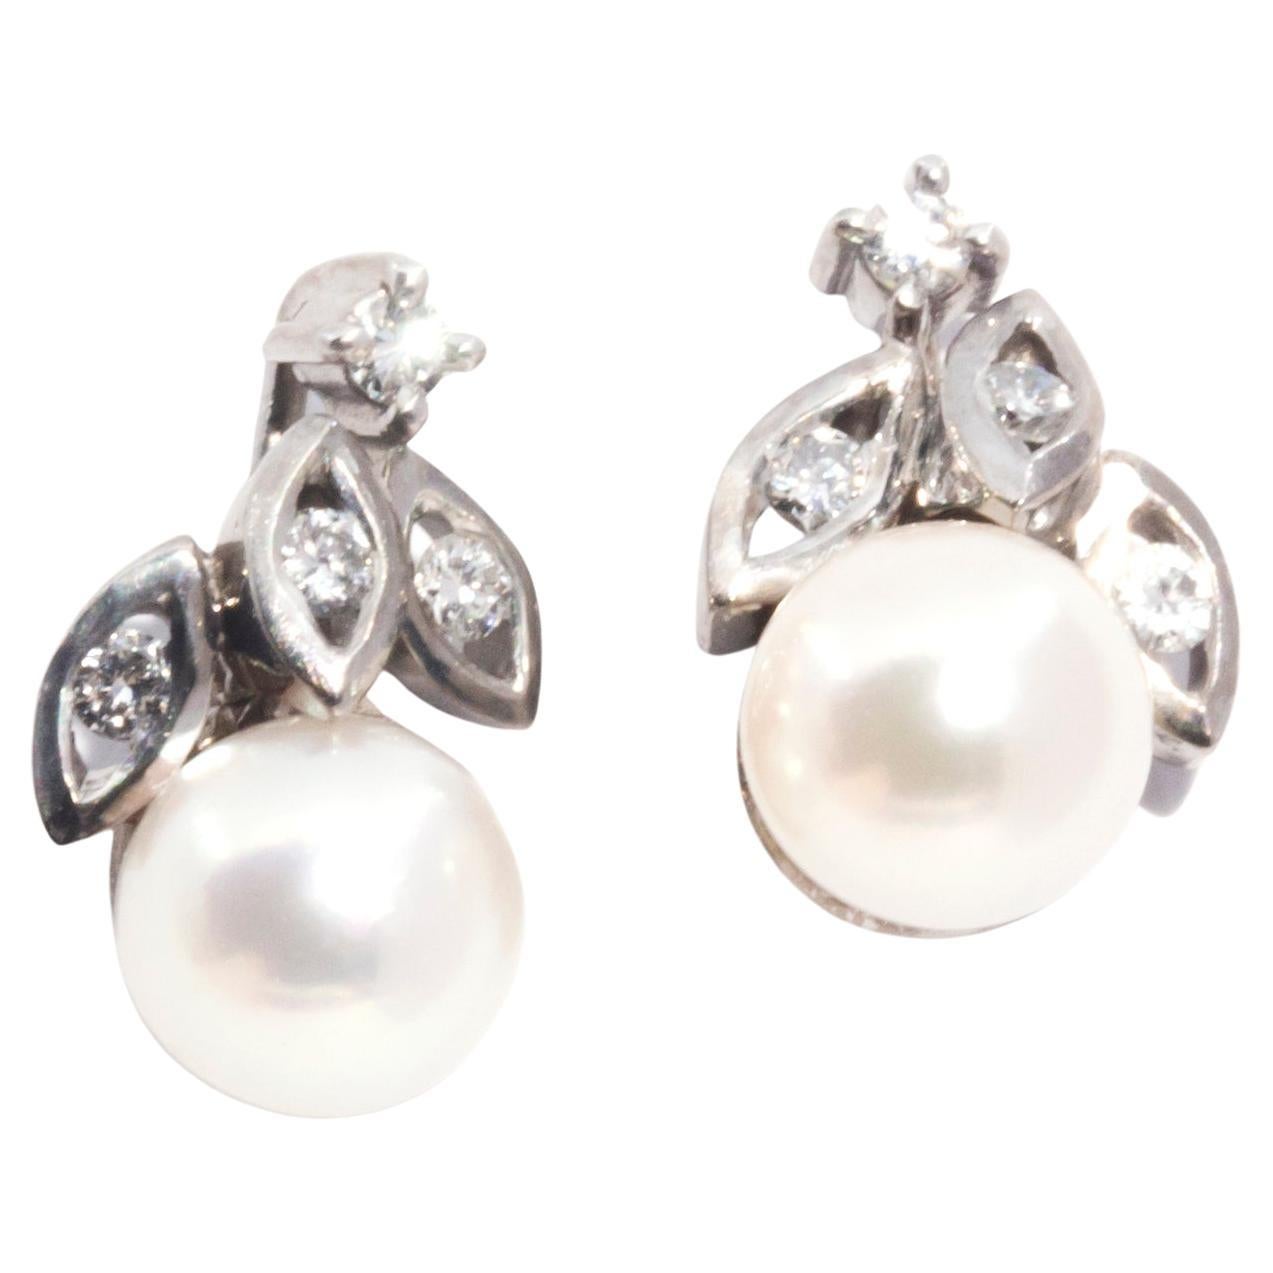 Circa 1970s 18 Carat White Gold Diamond and Akoya Pearl Vintage Cluster Earrings For Sale